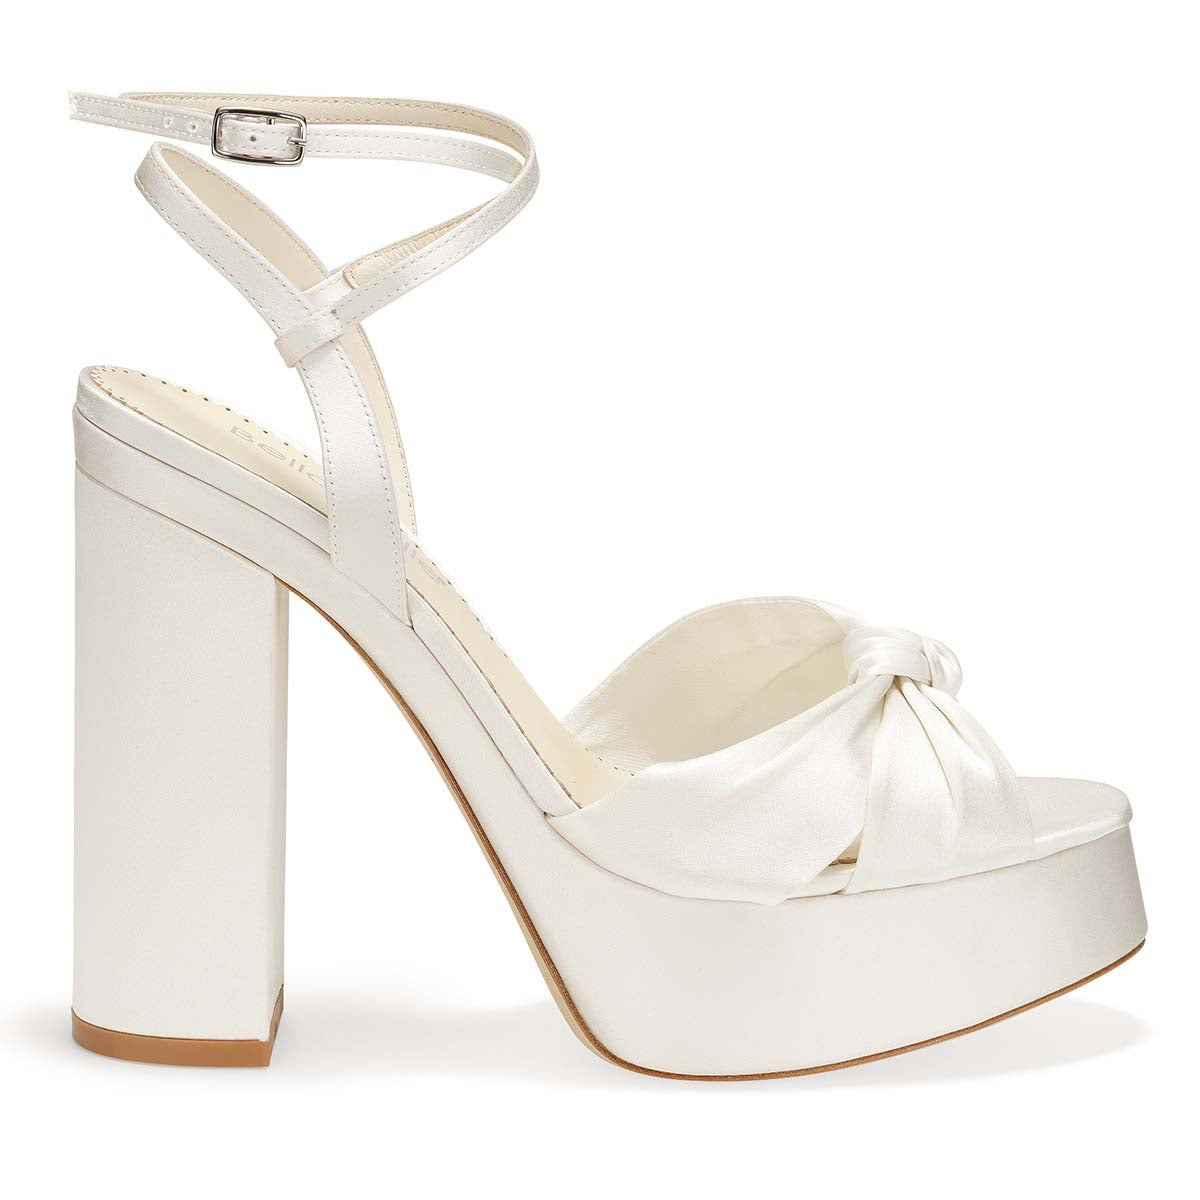 Be Mine Bridal Alette glitter platform sandals in white and silver | ASOS